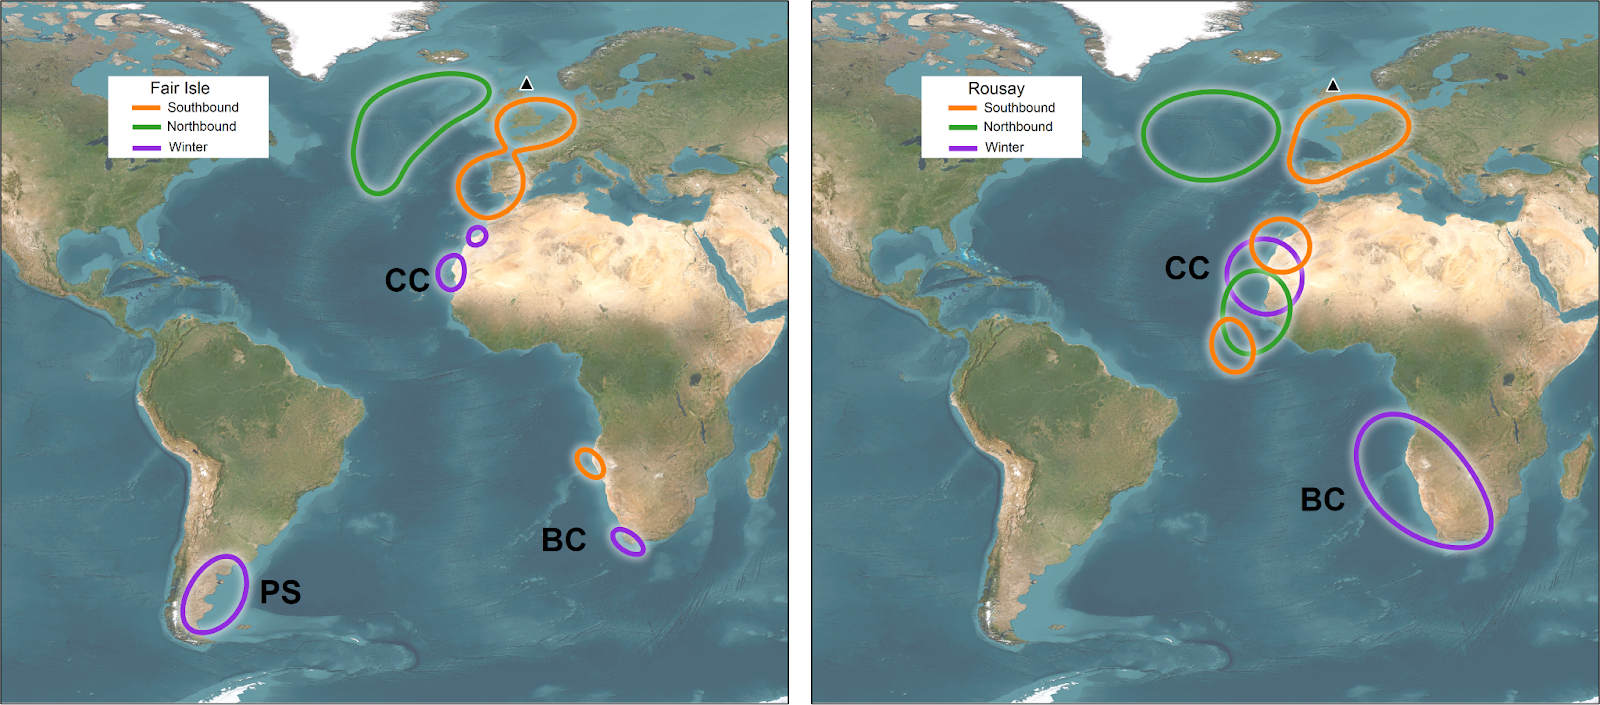 A world map showing the main staging areas of Fair Isle and Rousay Arctic Skuas during southward (autumn) migration and northward (spring) migration, and wintering areas, Staging areas on the southbound migration included areas off the Iberian Peninsula and west Africa. Staging areas on the northbound migration included areas off west Africa and, notably, in the mid-Atlantic.